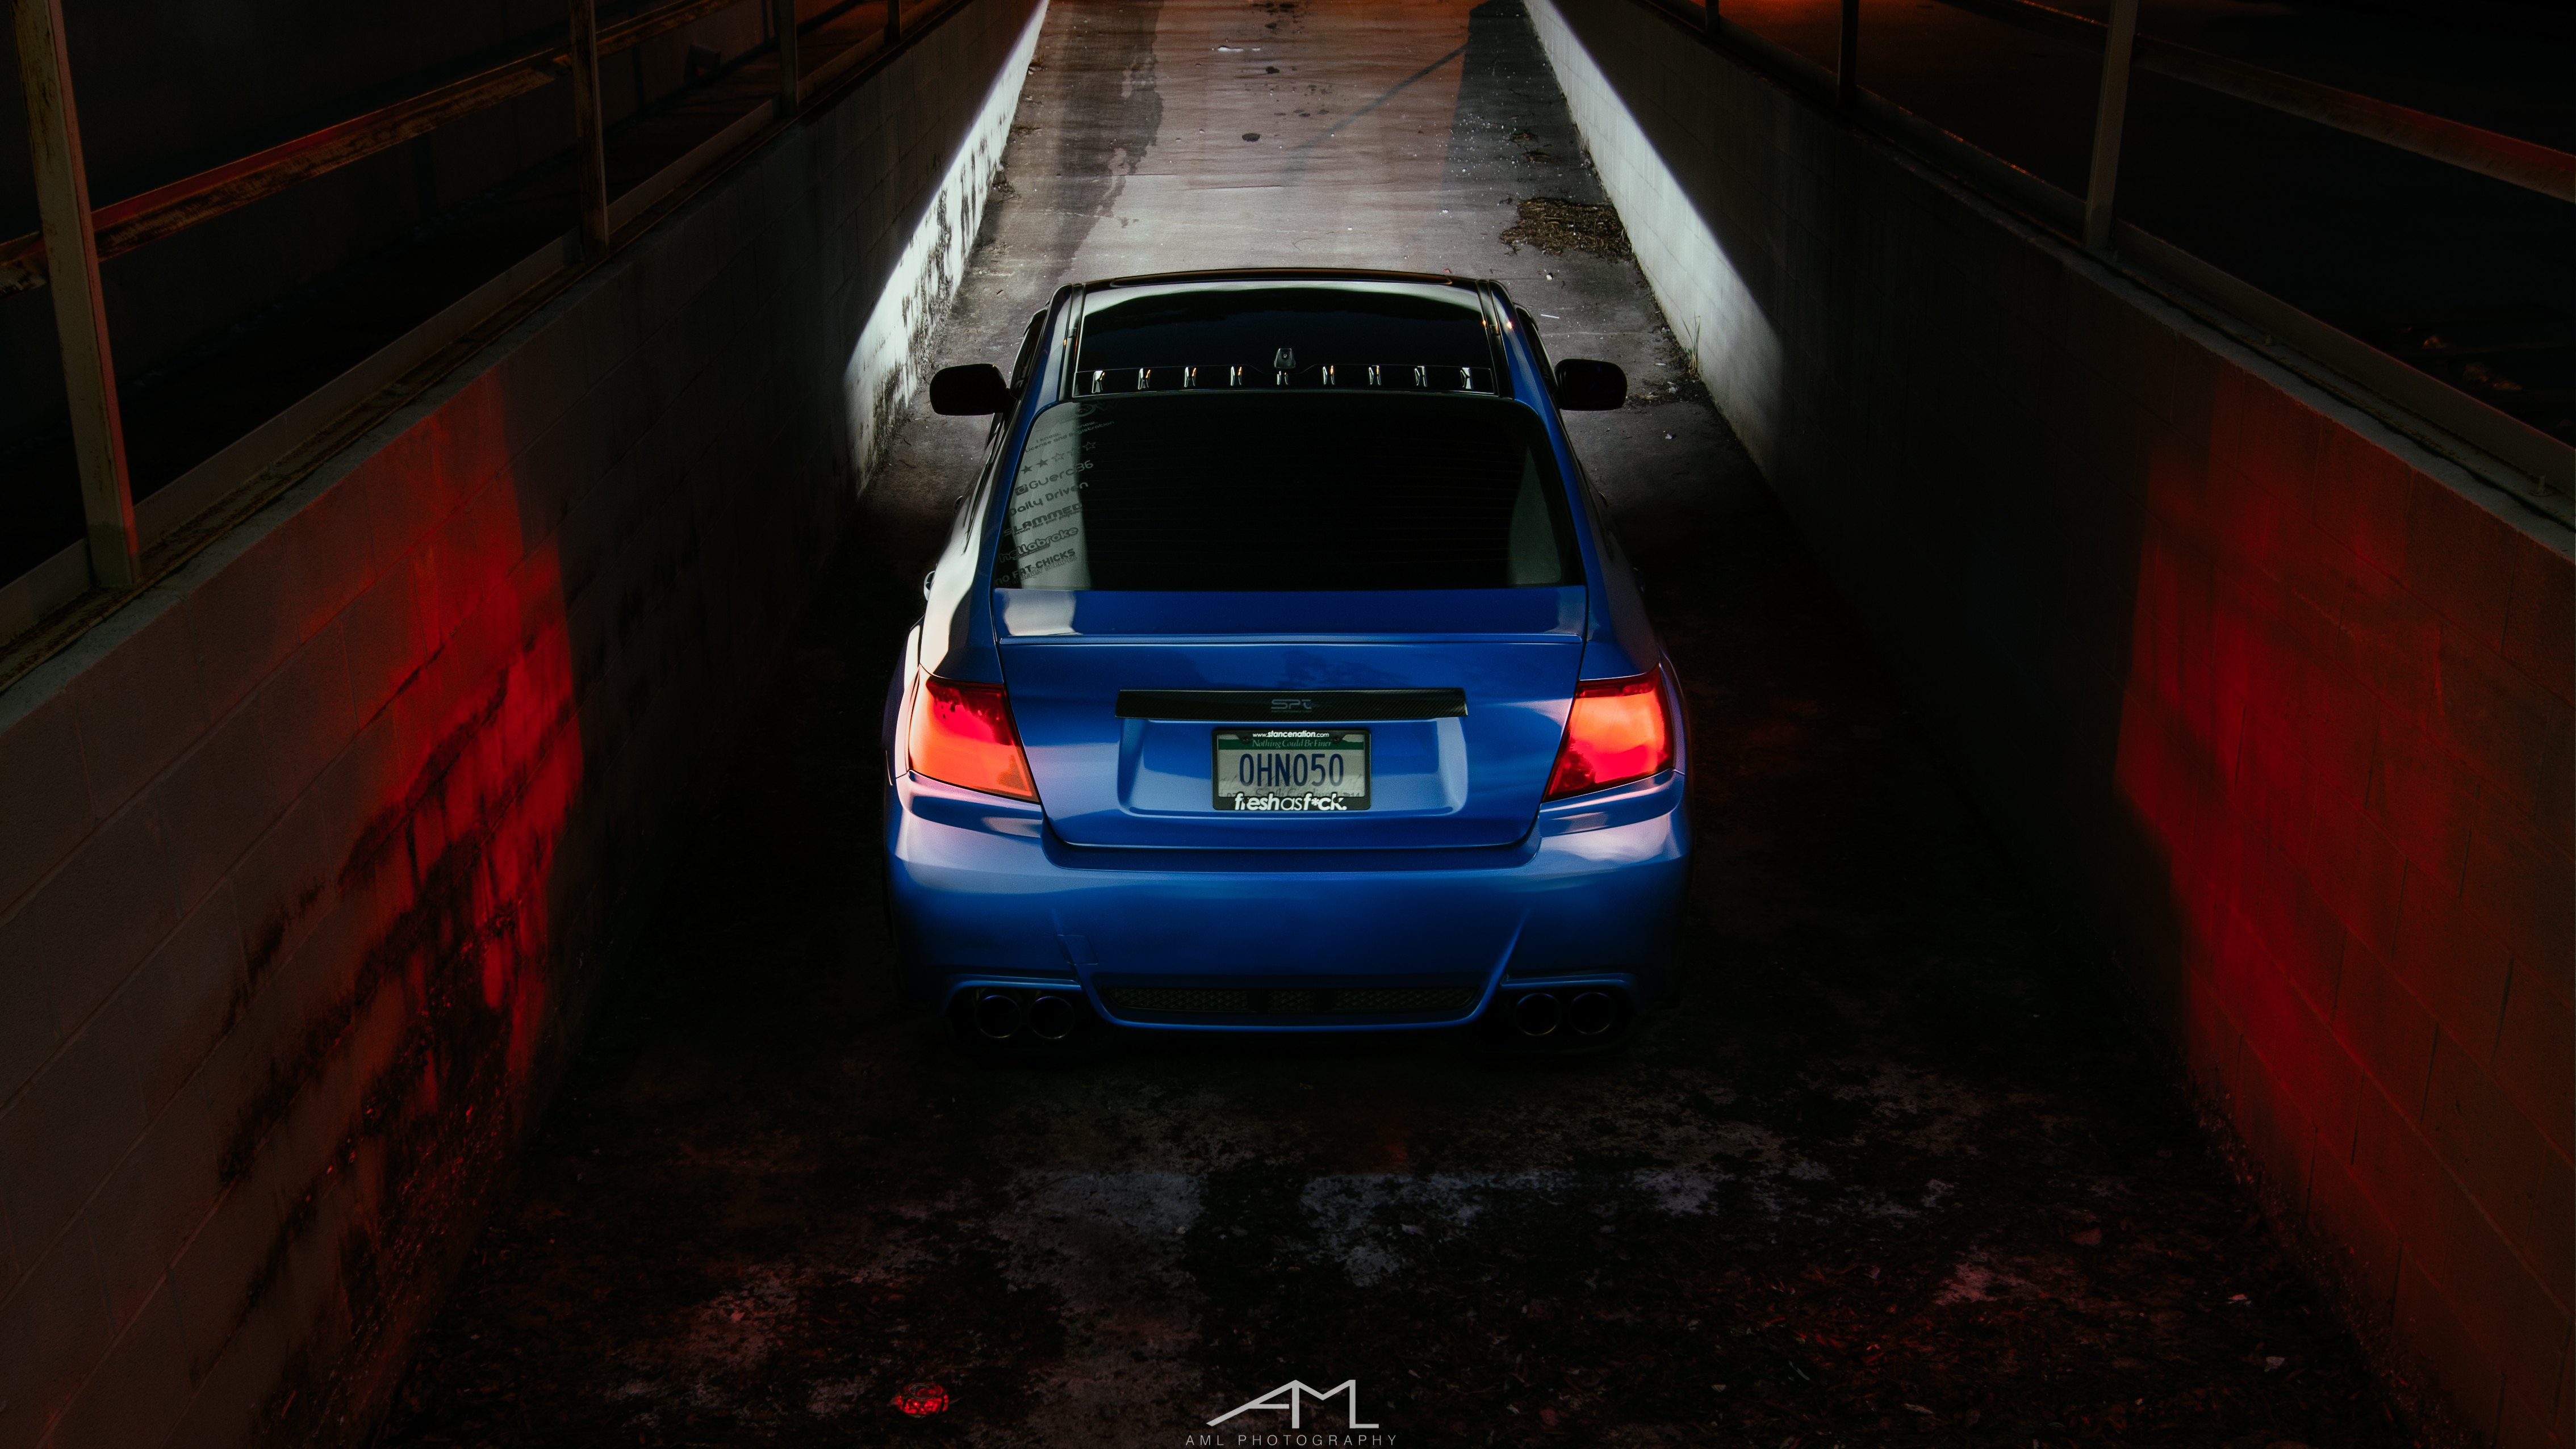 Red LED Taillights on Blue Subaru WRX - Photo by Arlen Liverman